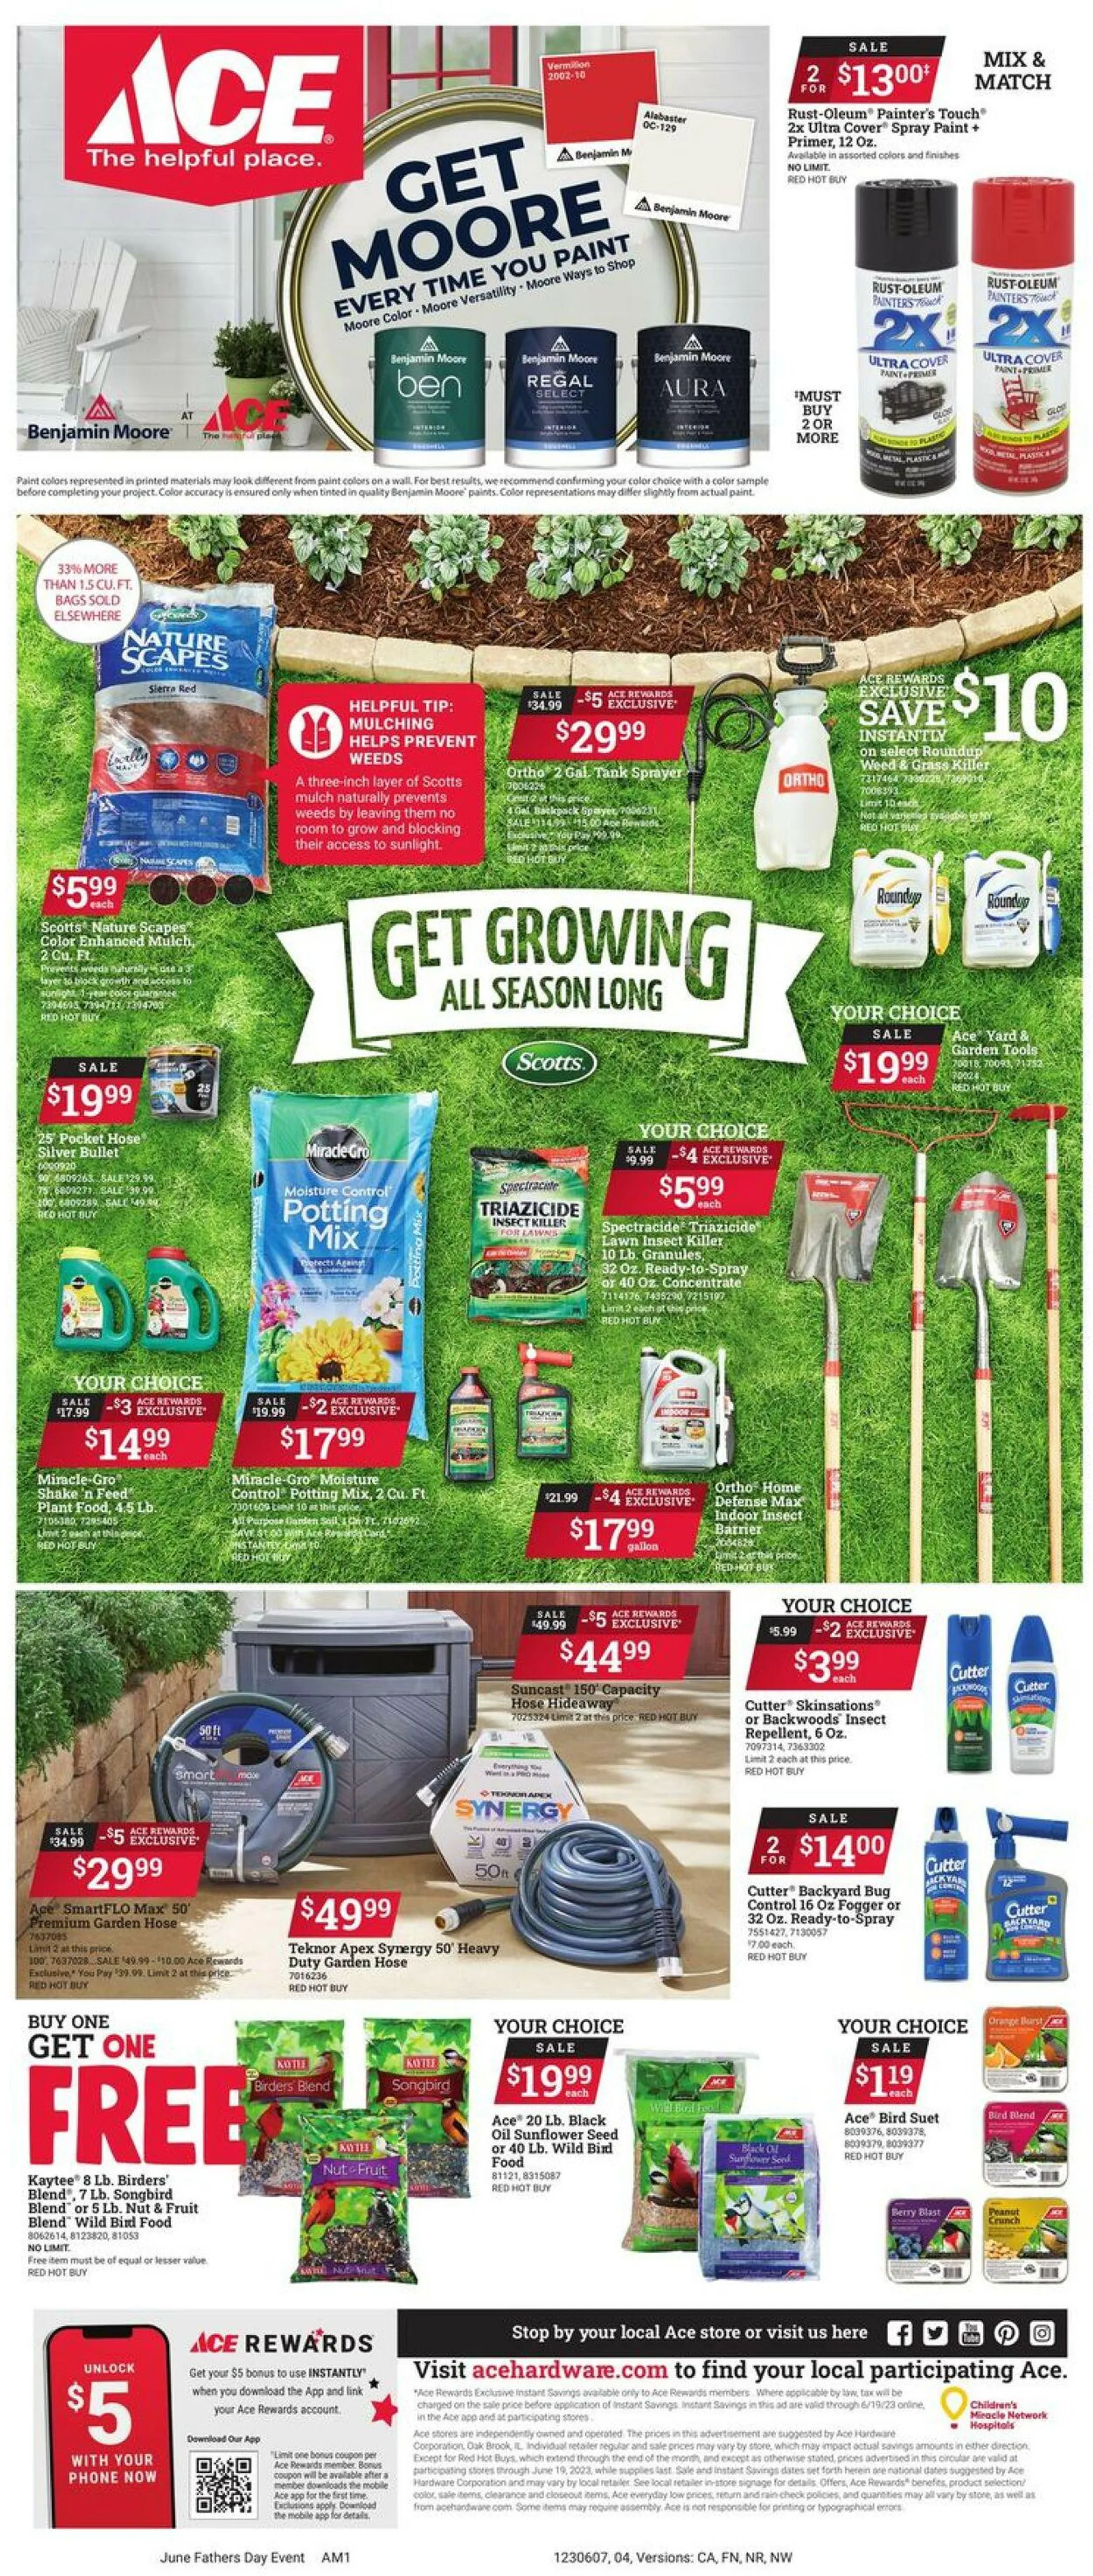 Ace Hardware Current weekly ad - 4